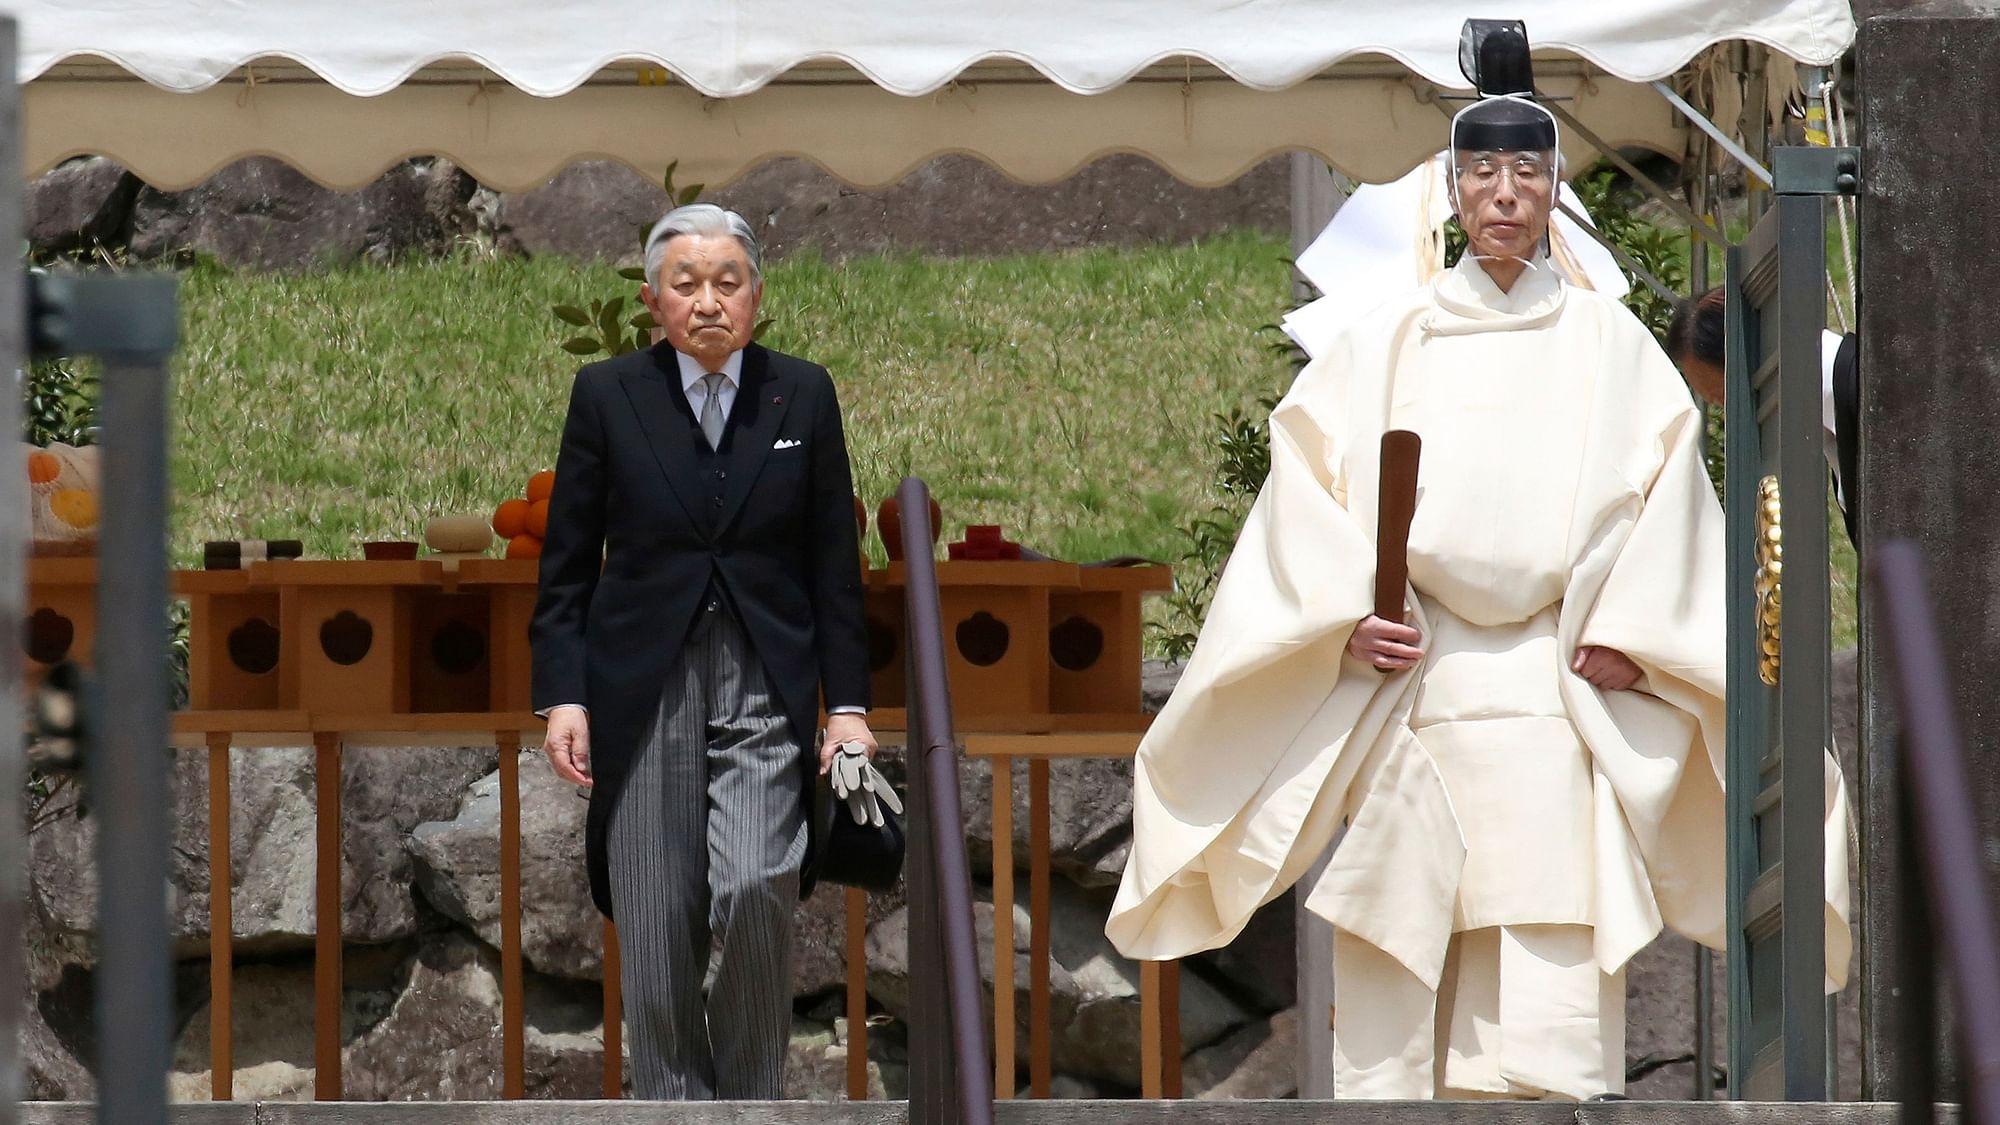 Japan’s Emperor Akihito, left, is led by a Shinto priest, after visiting the tomb of his late father Hirohito to report his retirement at the Musashino Imperial Mausoleum in Tokyo, Tuesday, 23 April 2019.